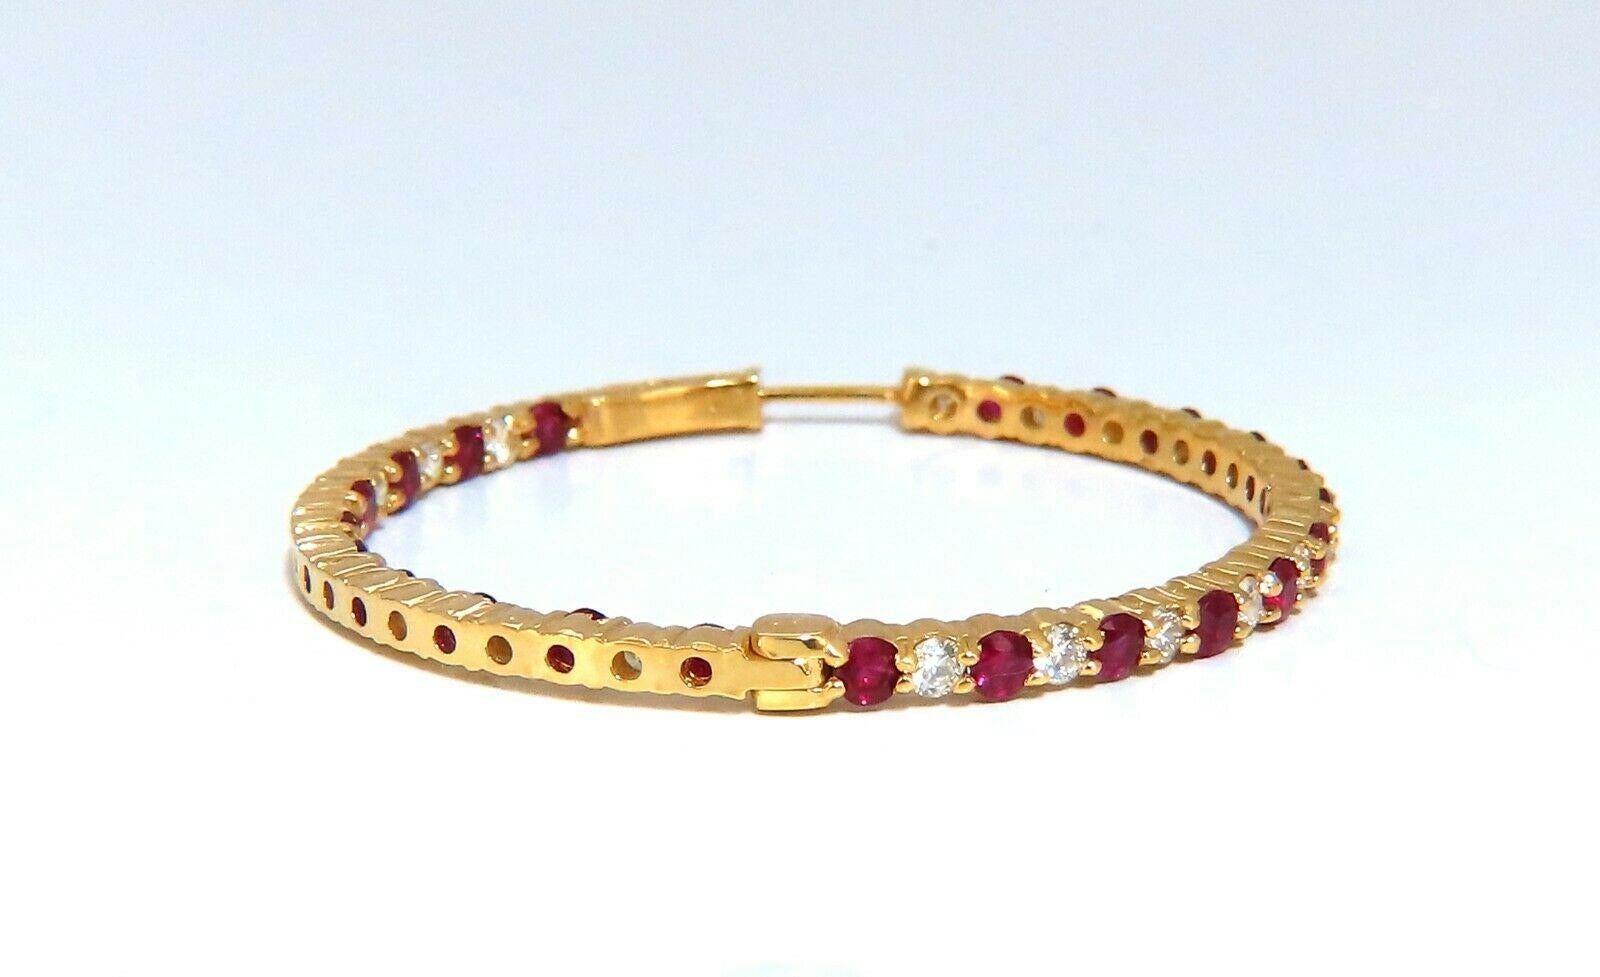 Inside/out  natural Ruby and Diamond hoop earrings.

3.40ct. round rubies, full brilliant cut clean clarity and transparent

1.68ct. natural round diamonds h color vs2 clarity.

14 karat rose gold 11.1 gram

42 mm wide (front to back)

2.5 mm wide